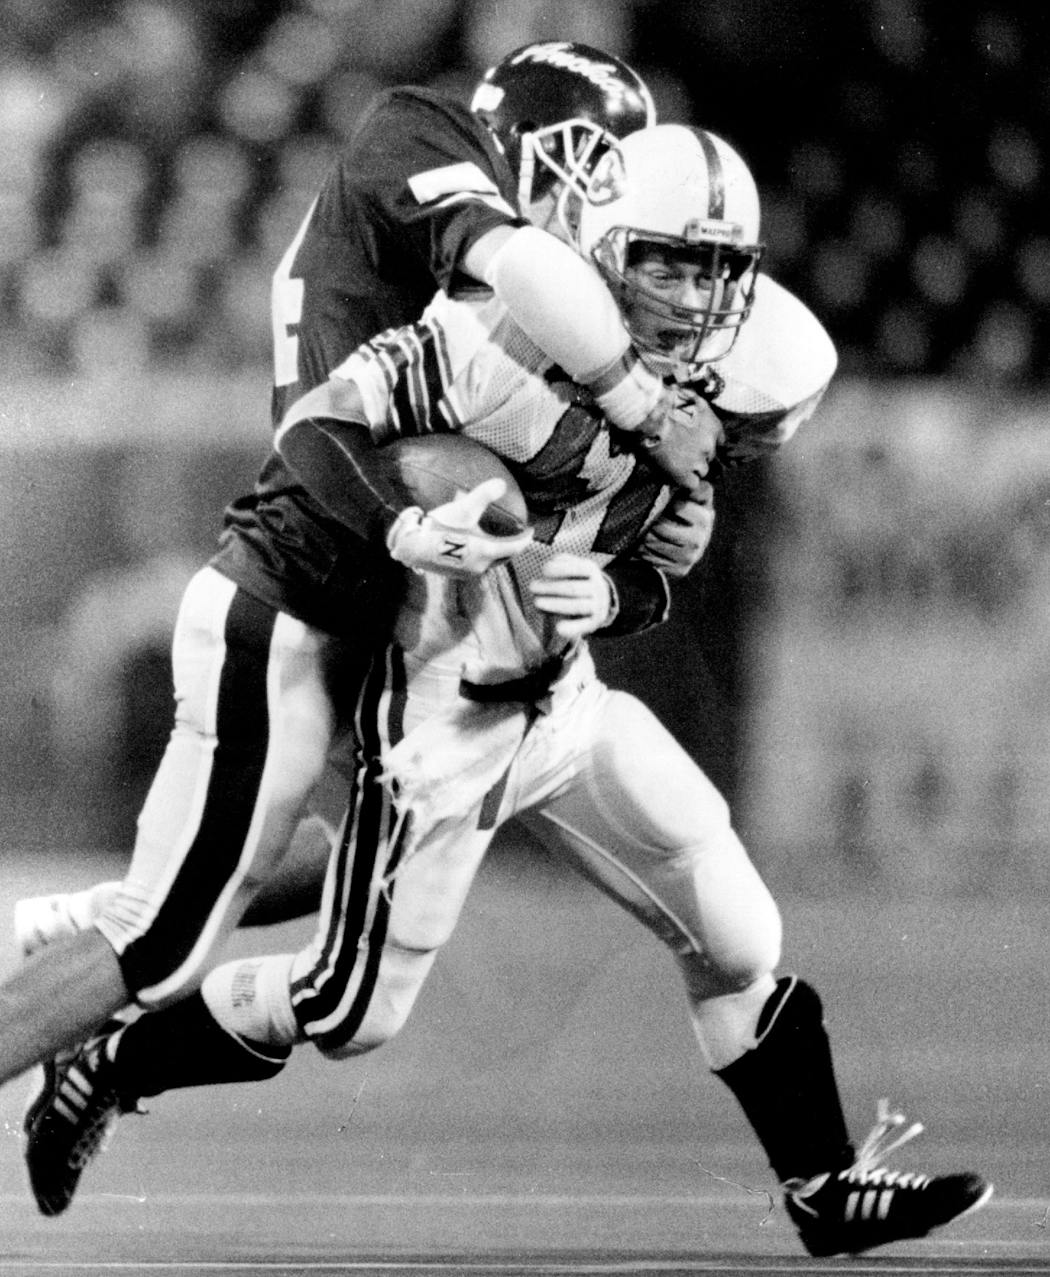 Anoka’s John DesRoches caught Elk River running back Brian Reighard from behind late in the fourth quarter of their title game in 1990.